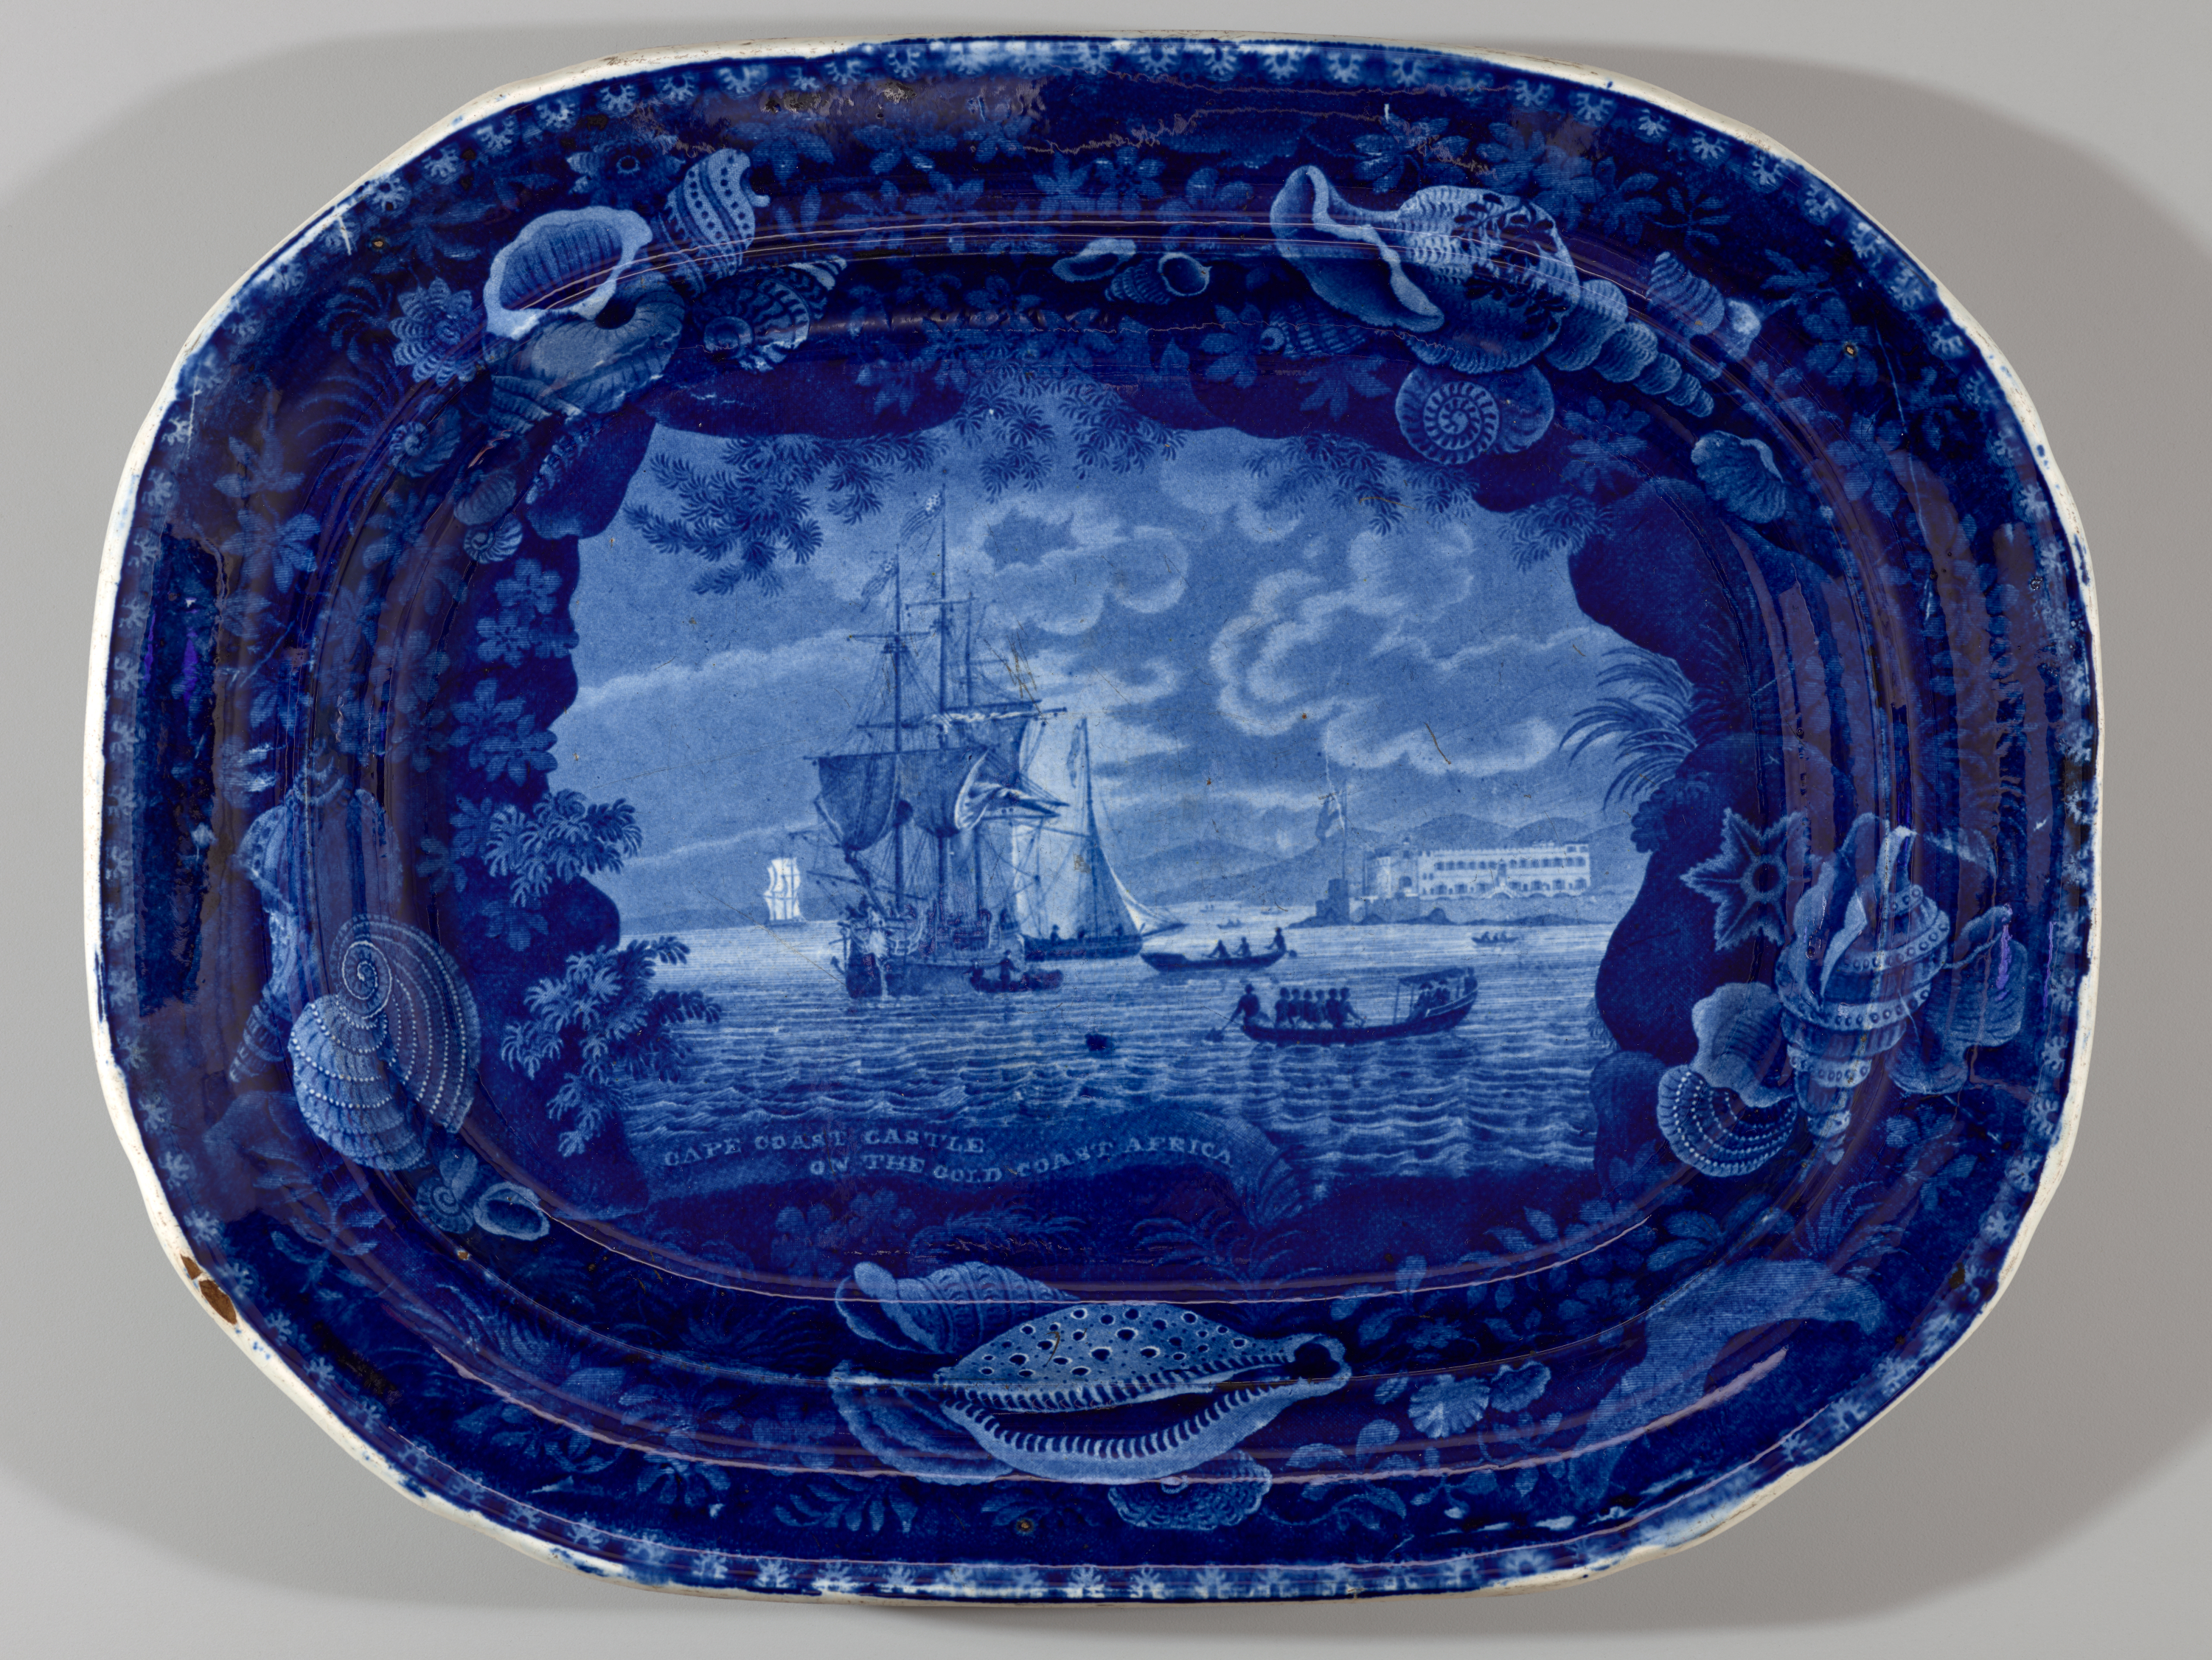 /A%20transfer-printed%20earthenware%20platter%20with%20dark%20blue%20decorations%20depicting%20a%20coastal%20scene.